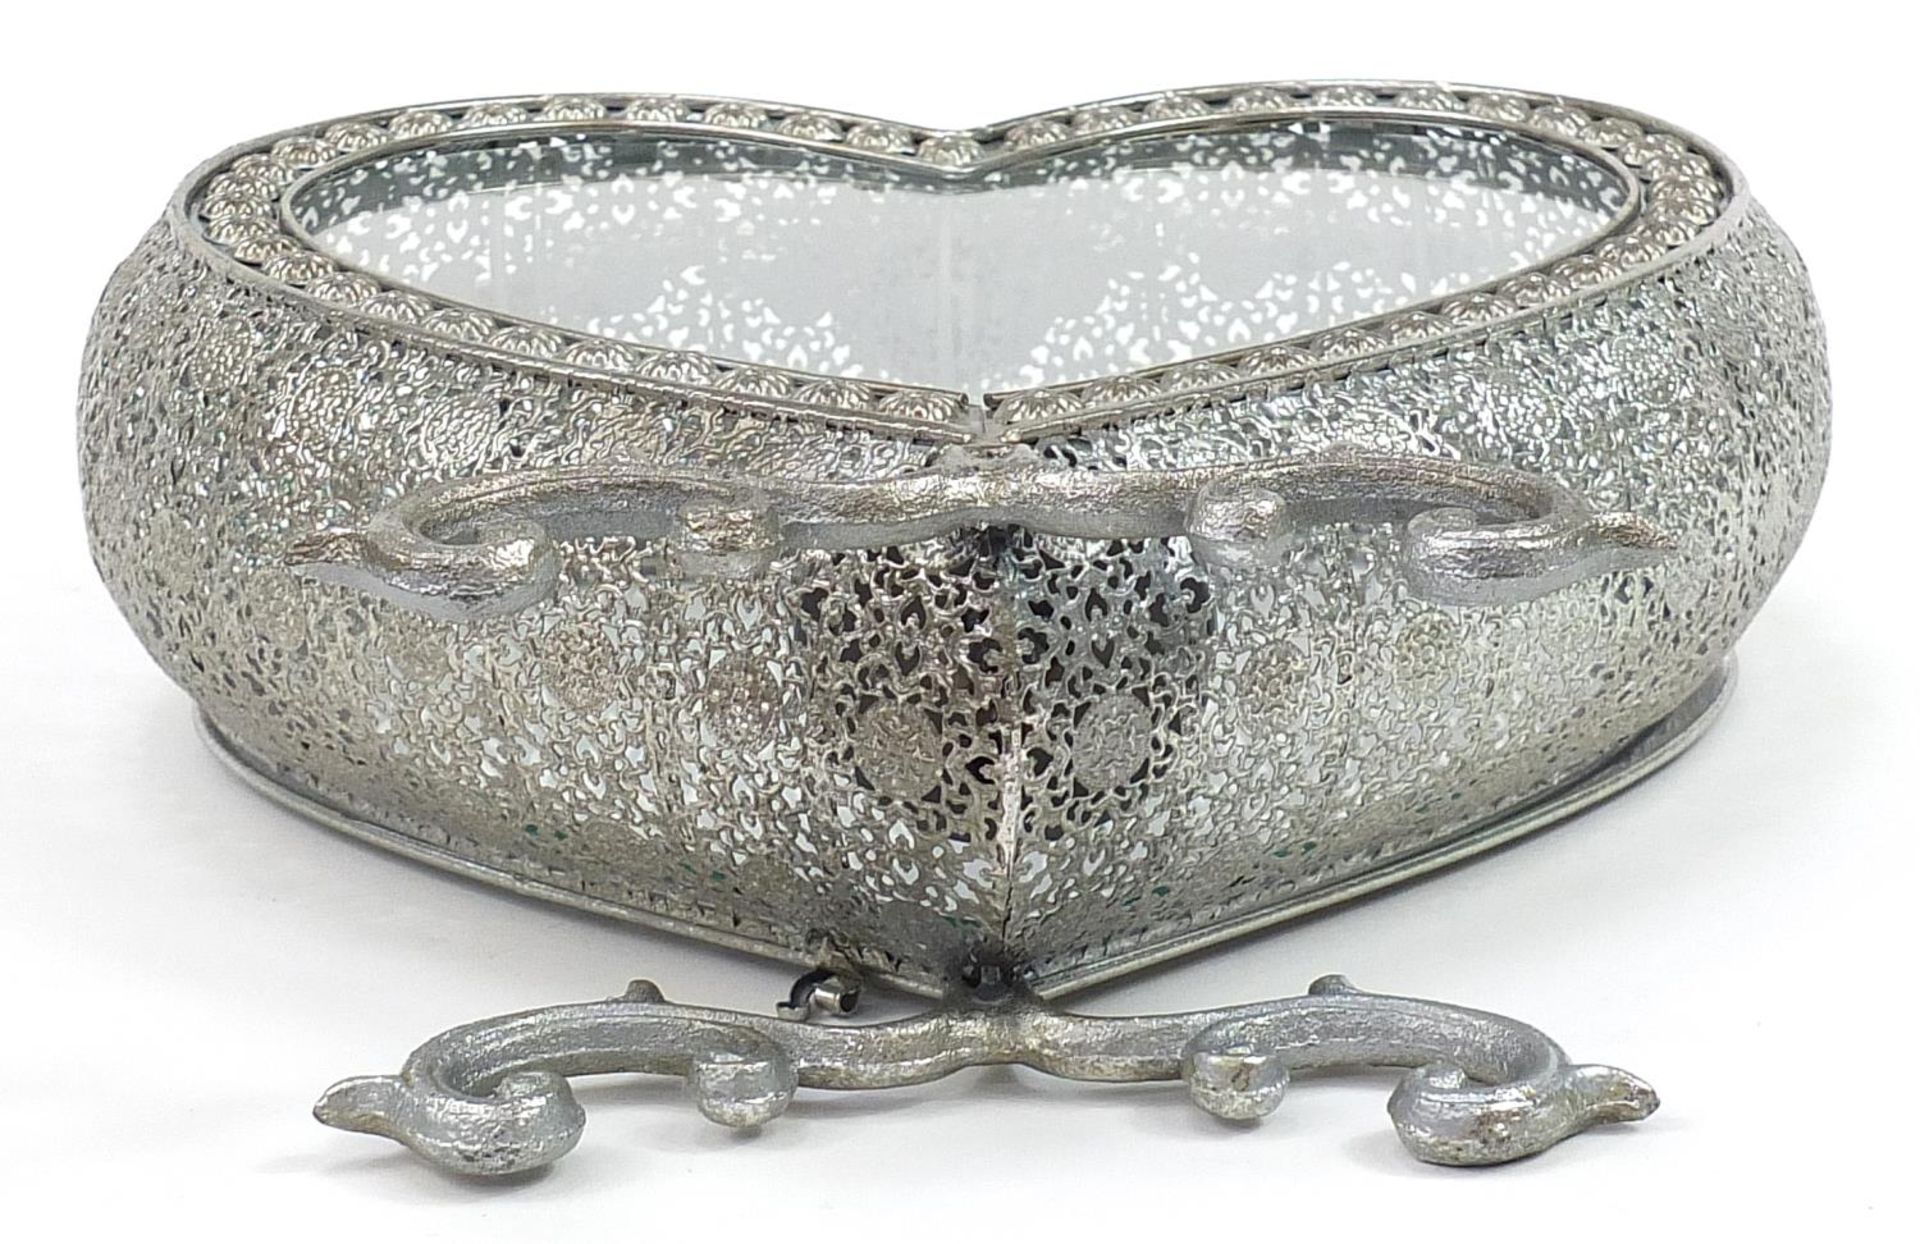 Ornate silvered love heart tealight holder with glass panels, 52cm high - Image 3 of 3